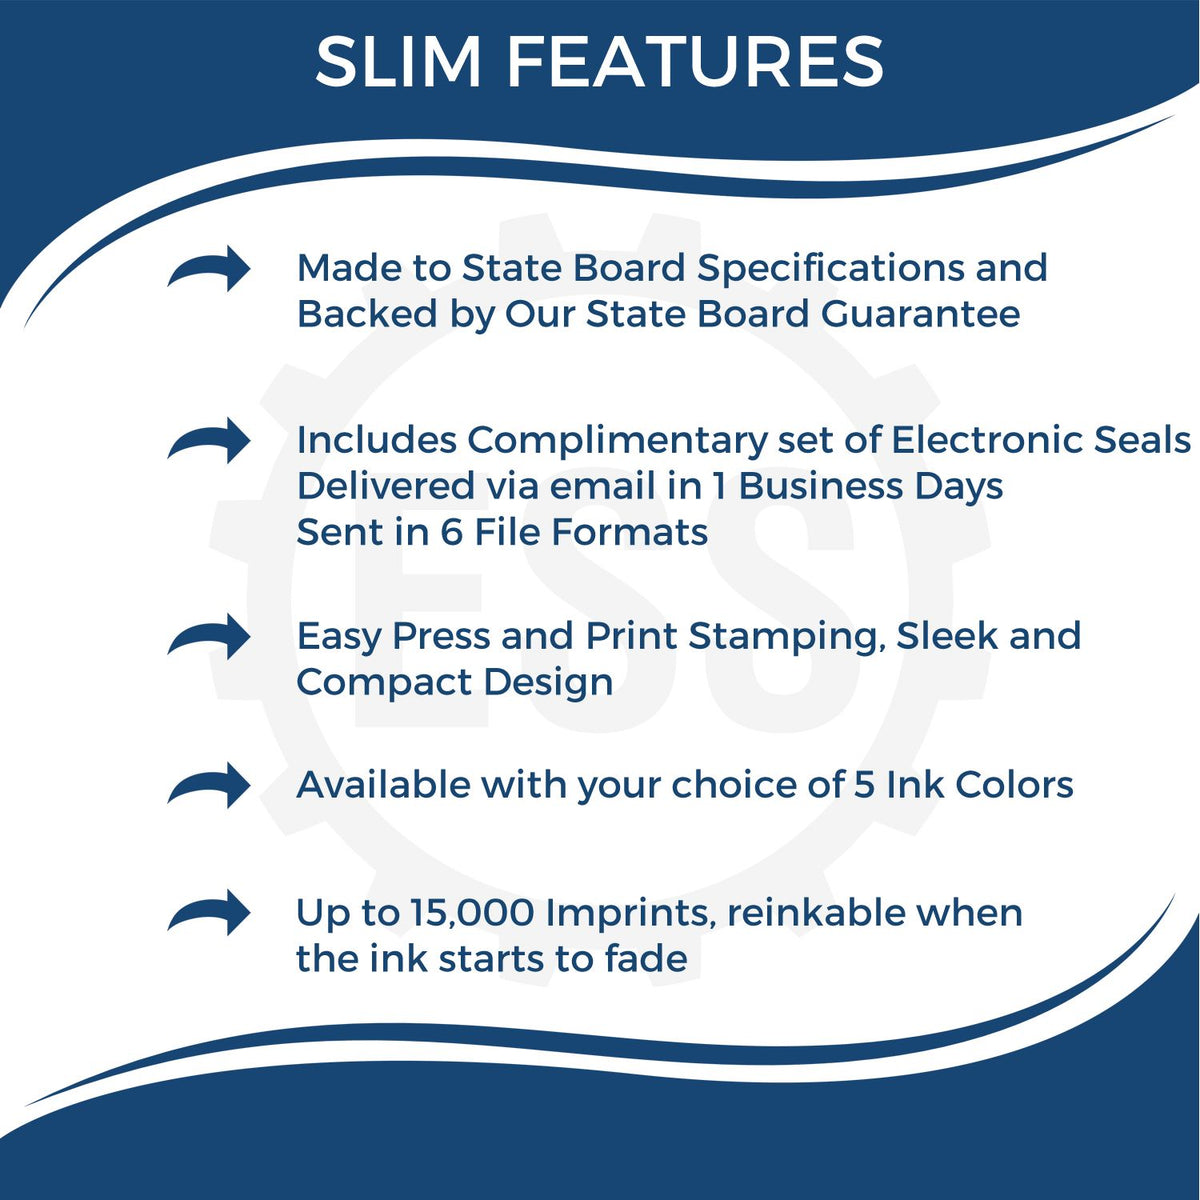 A picture of an infographic highlighting the selling points for the Super Slim Missouri Notary Public Stamp